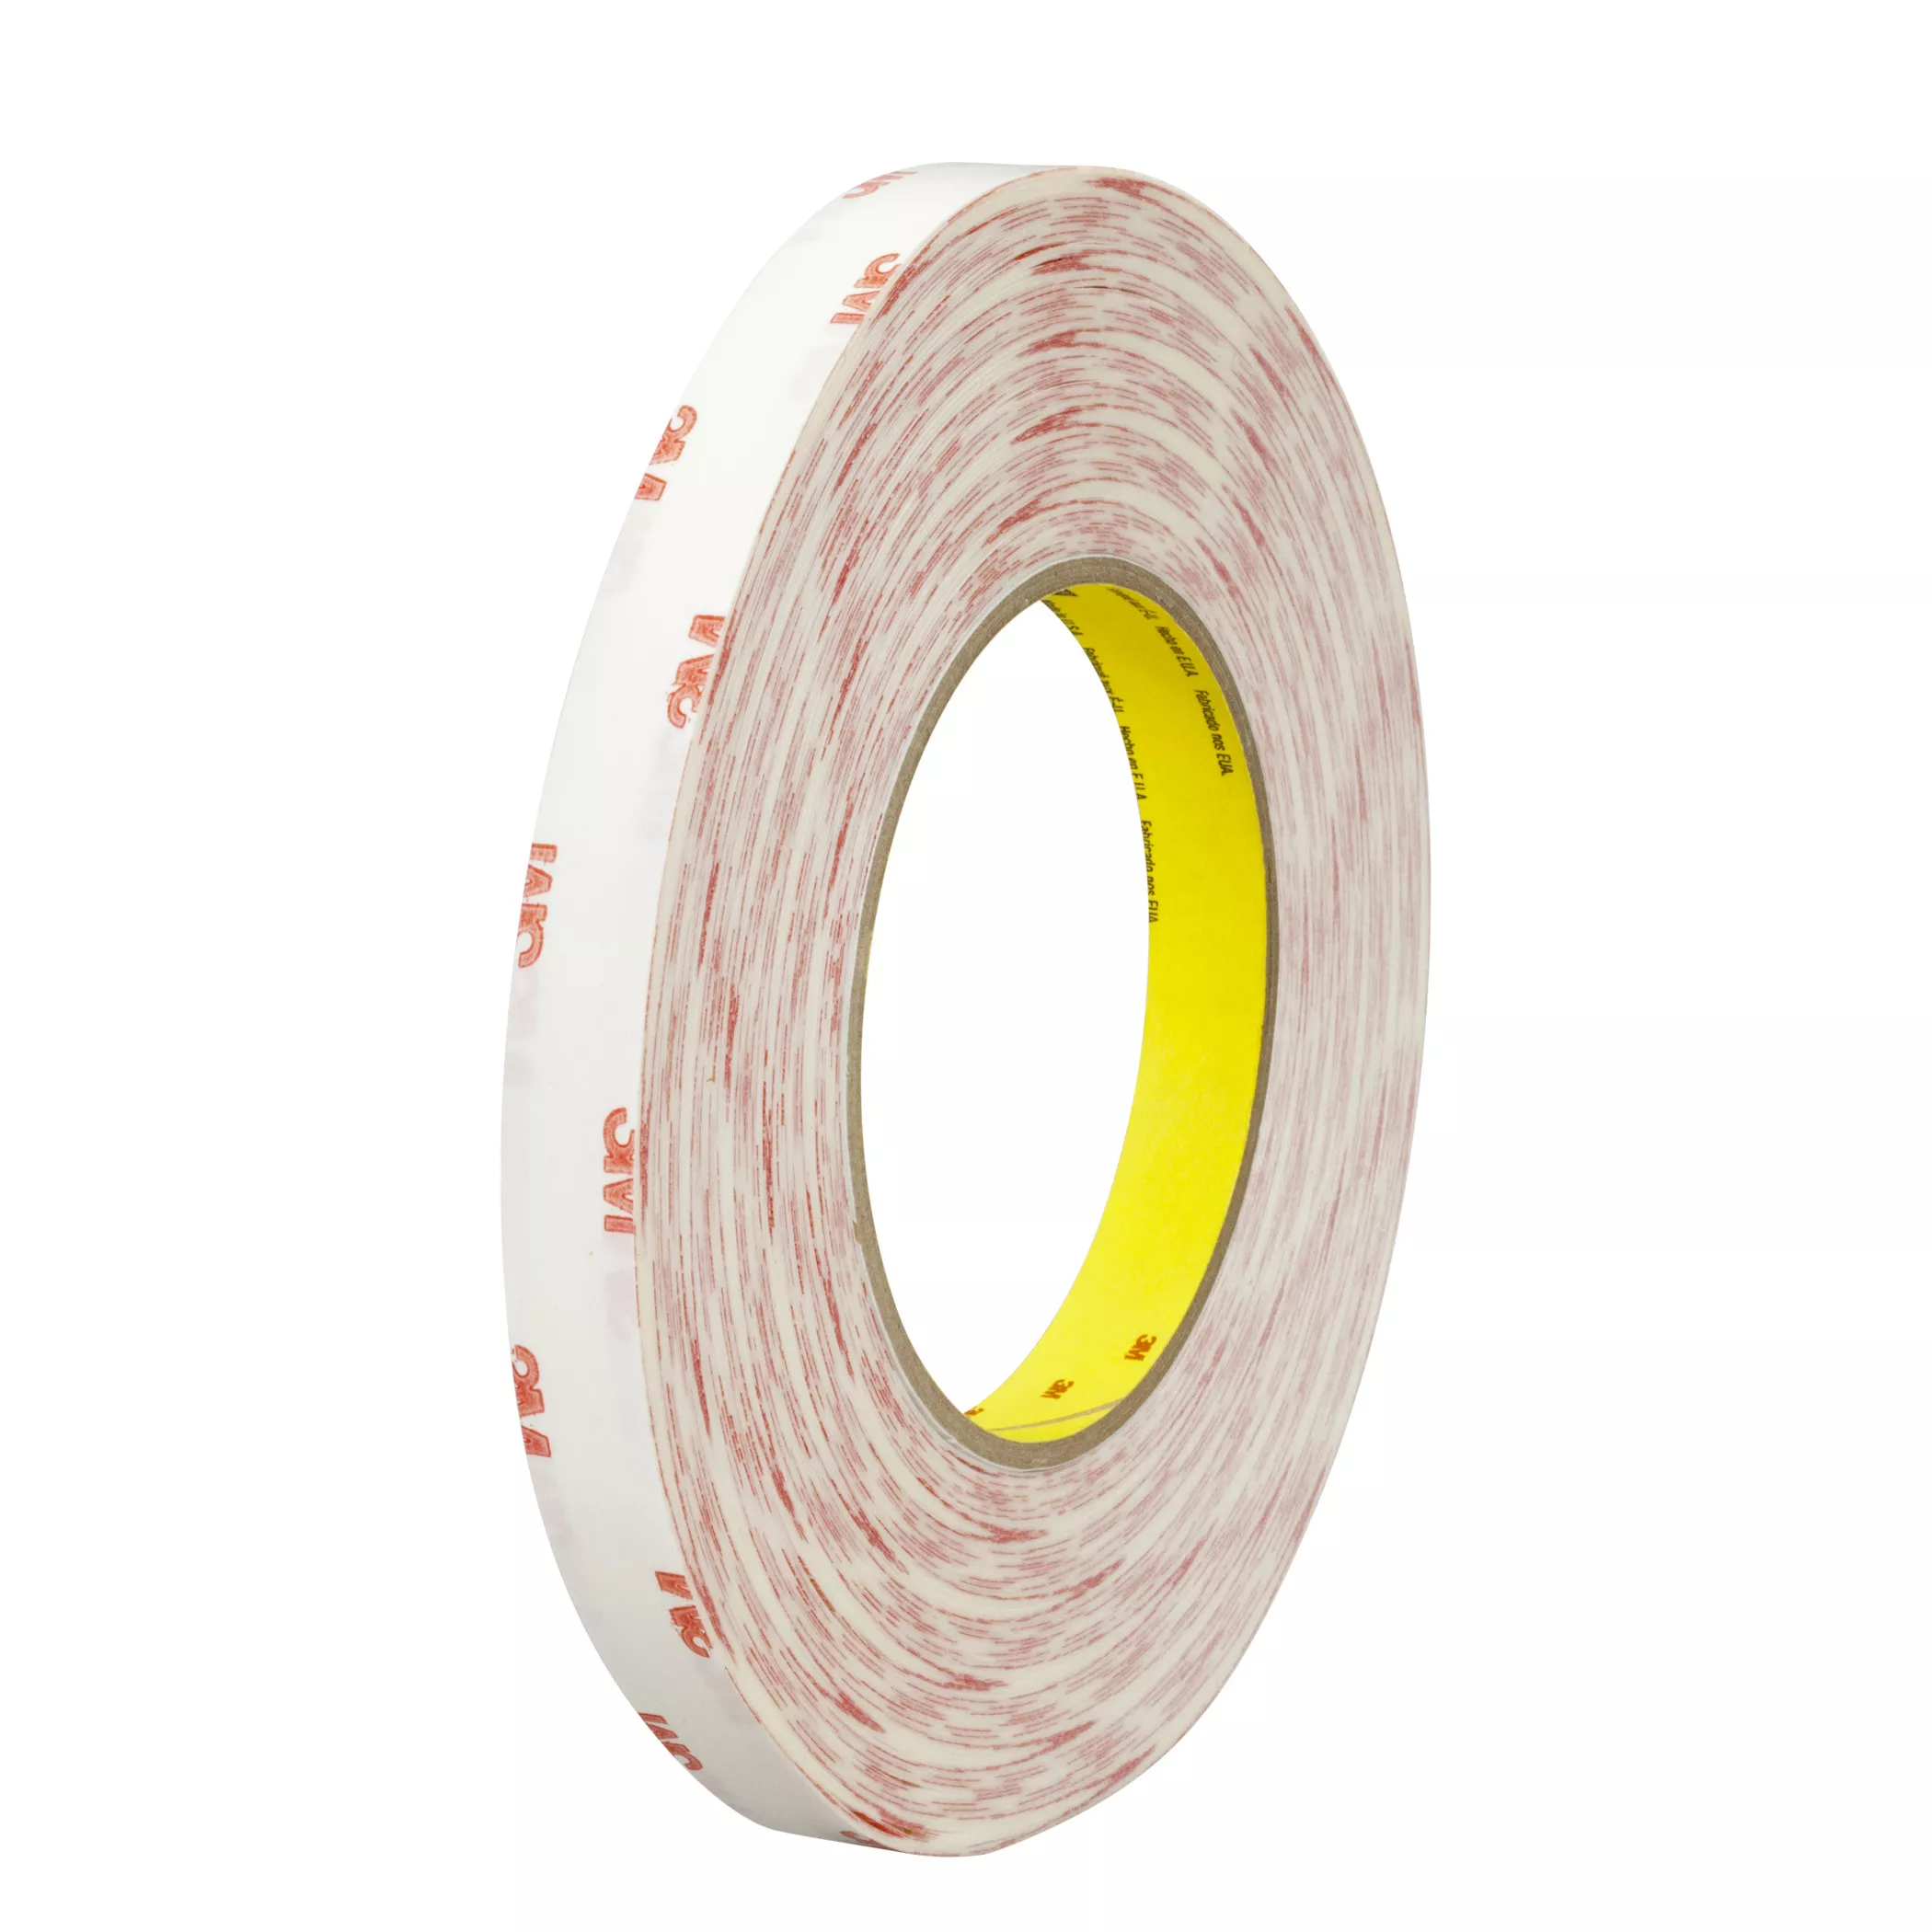 SKU 7000123780 | 3M™ Double Coated Tissue Tape 9456